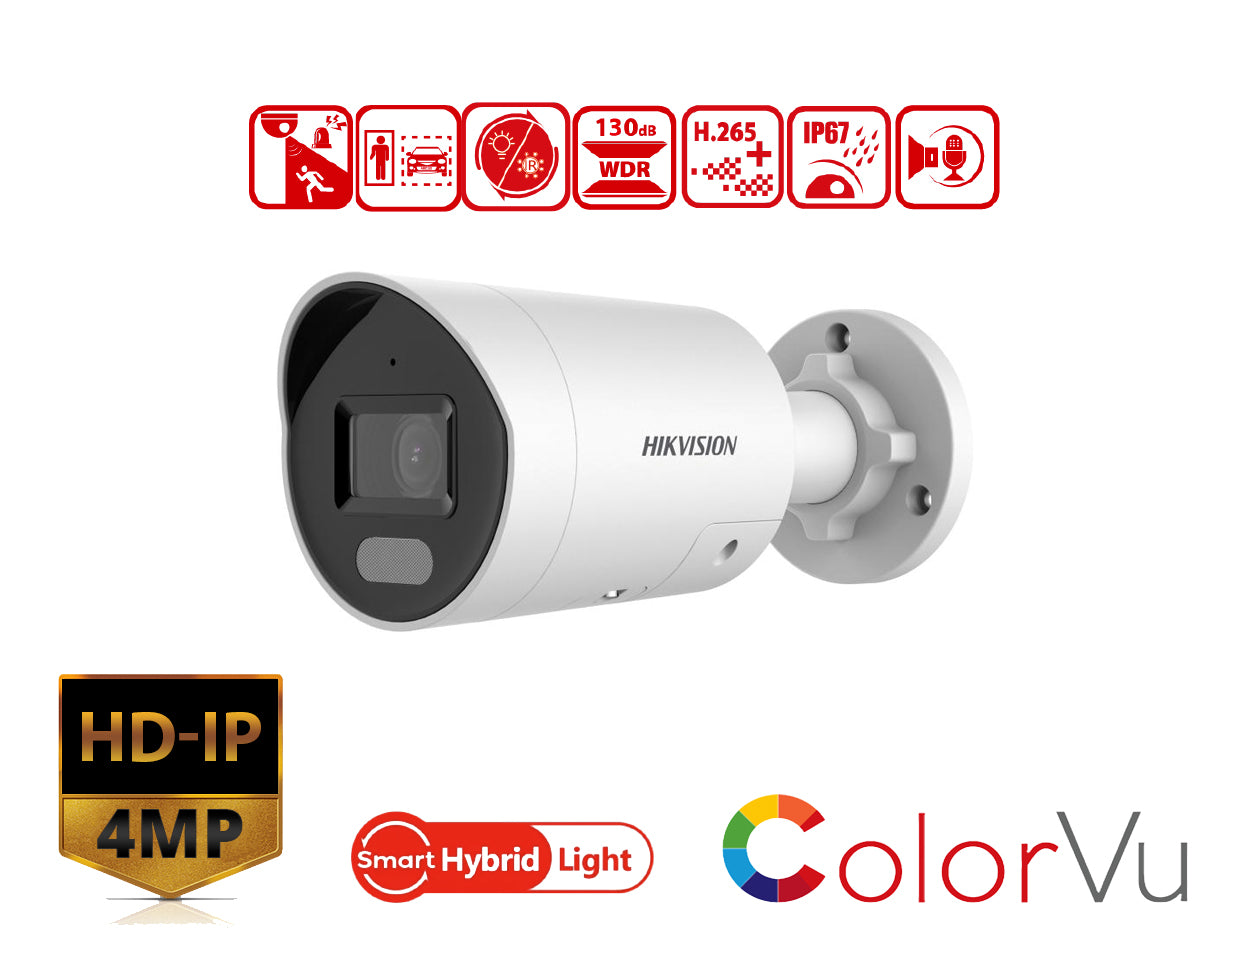 HIKVISION DS-2CD2047G2H-LIU/SL(2.8mm) - 4 MP Smart Hybrid Light with ColorVu Fixed Mini Bullet Network Camera